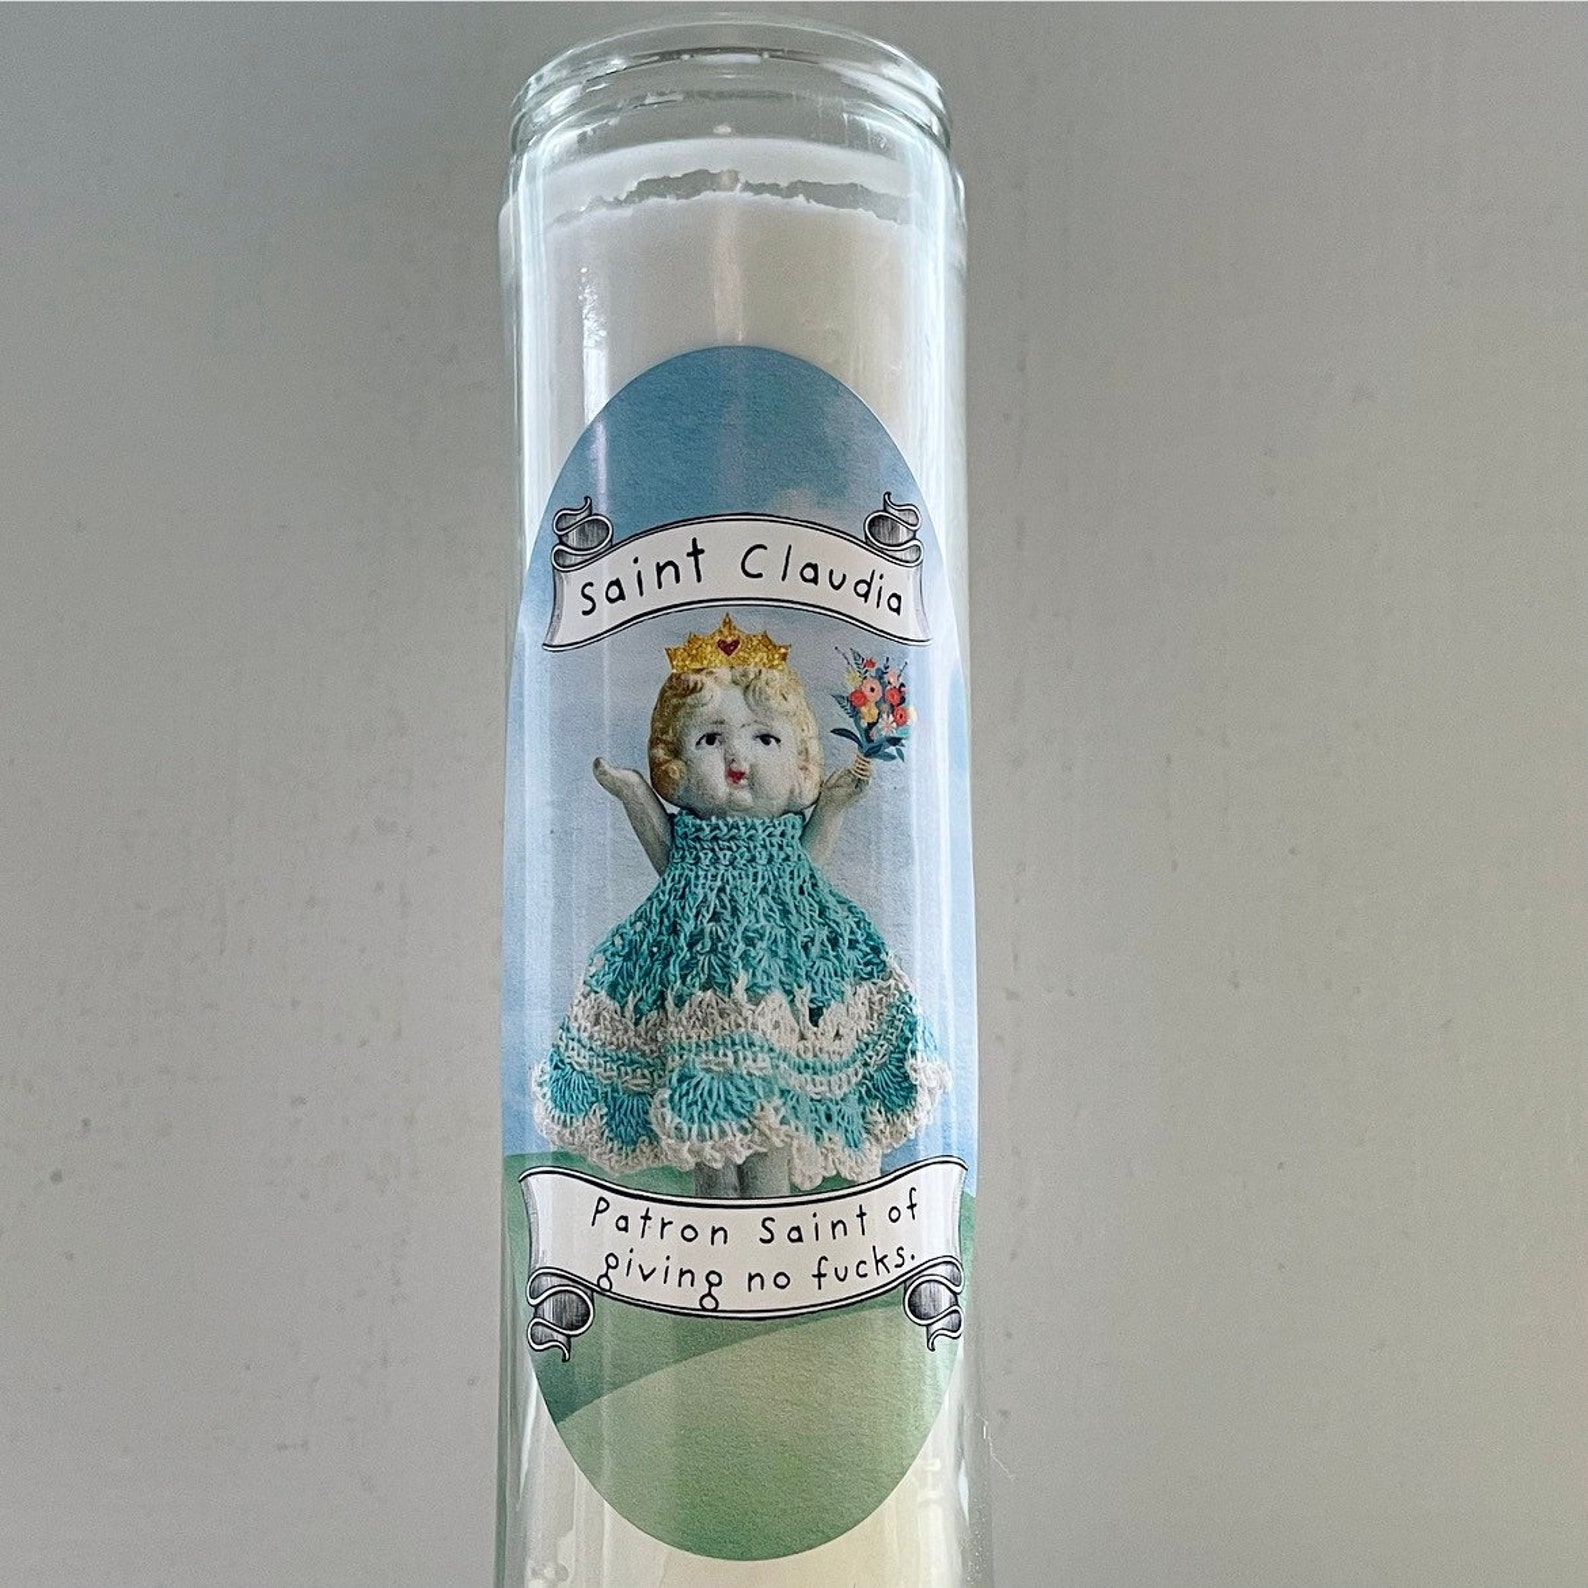 Patron Saint of Giving No Fcks Candle Claudia Doll Gag Gift - Etsy